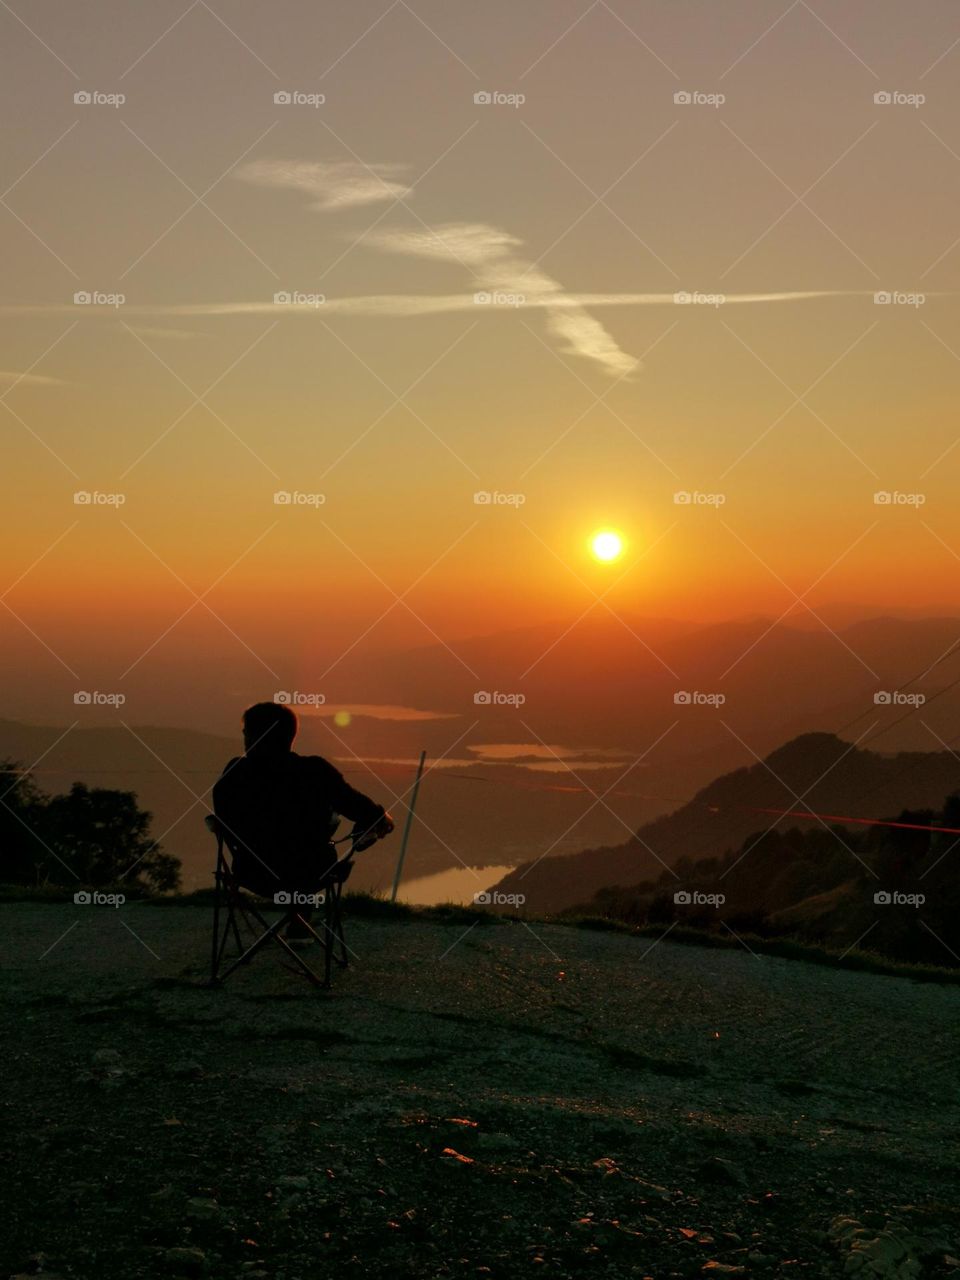 Sunset and amazing views. Man enjoy the sunset... Nature and people. Mountains and lakes. Autumn colors.